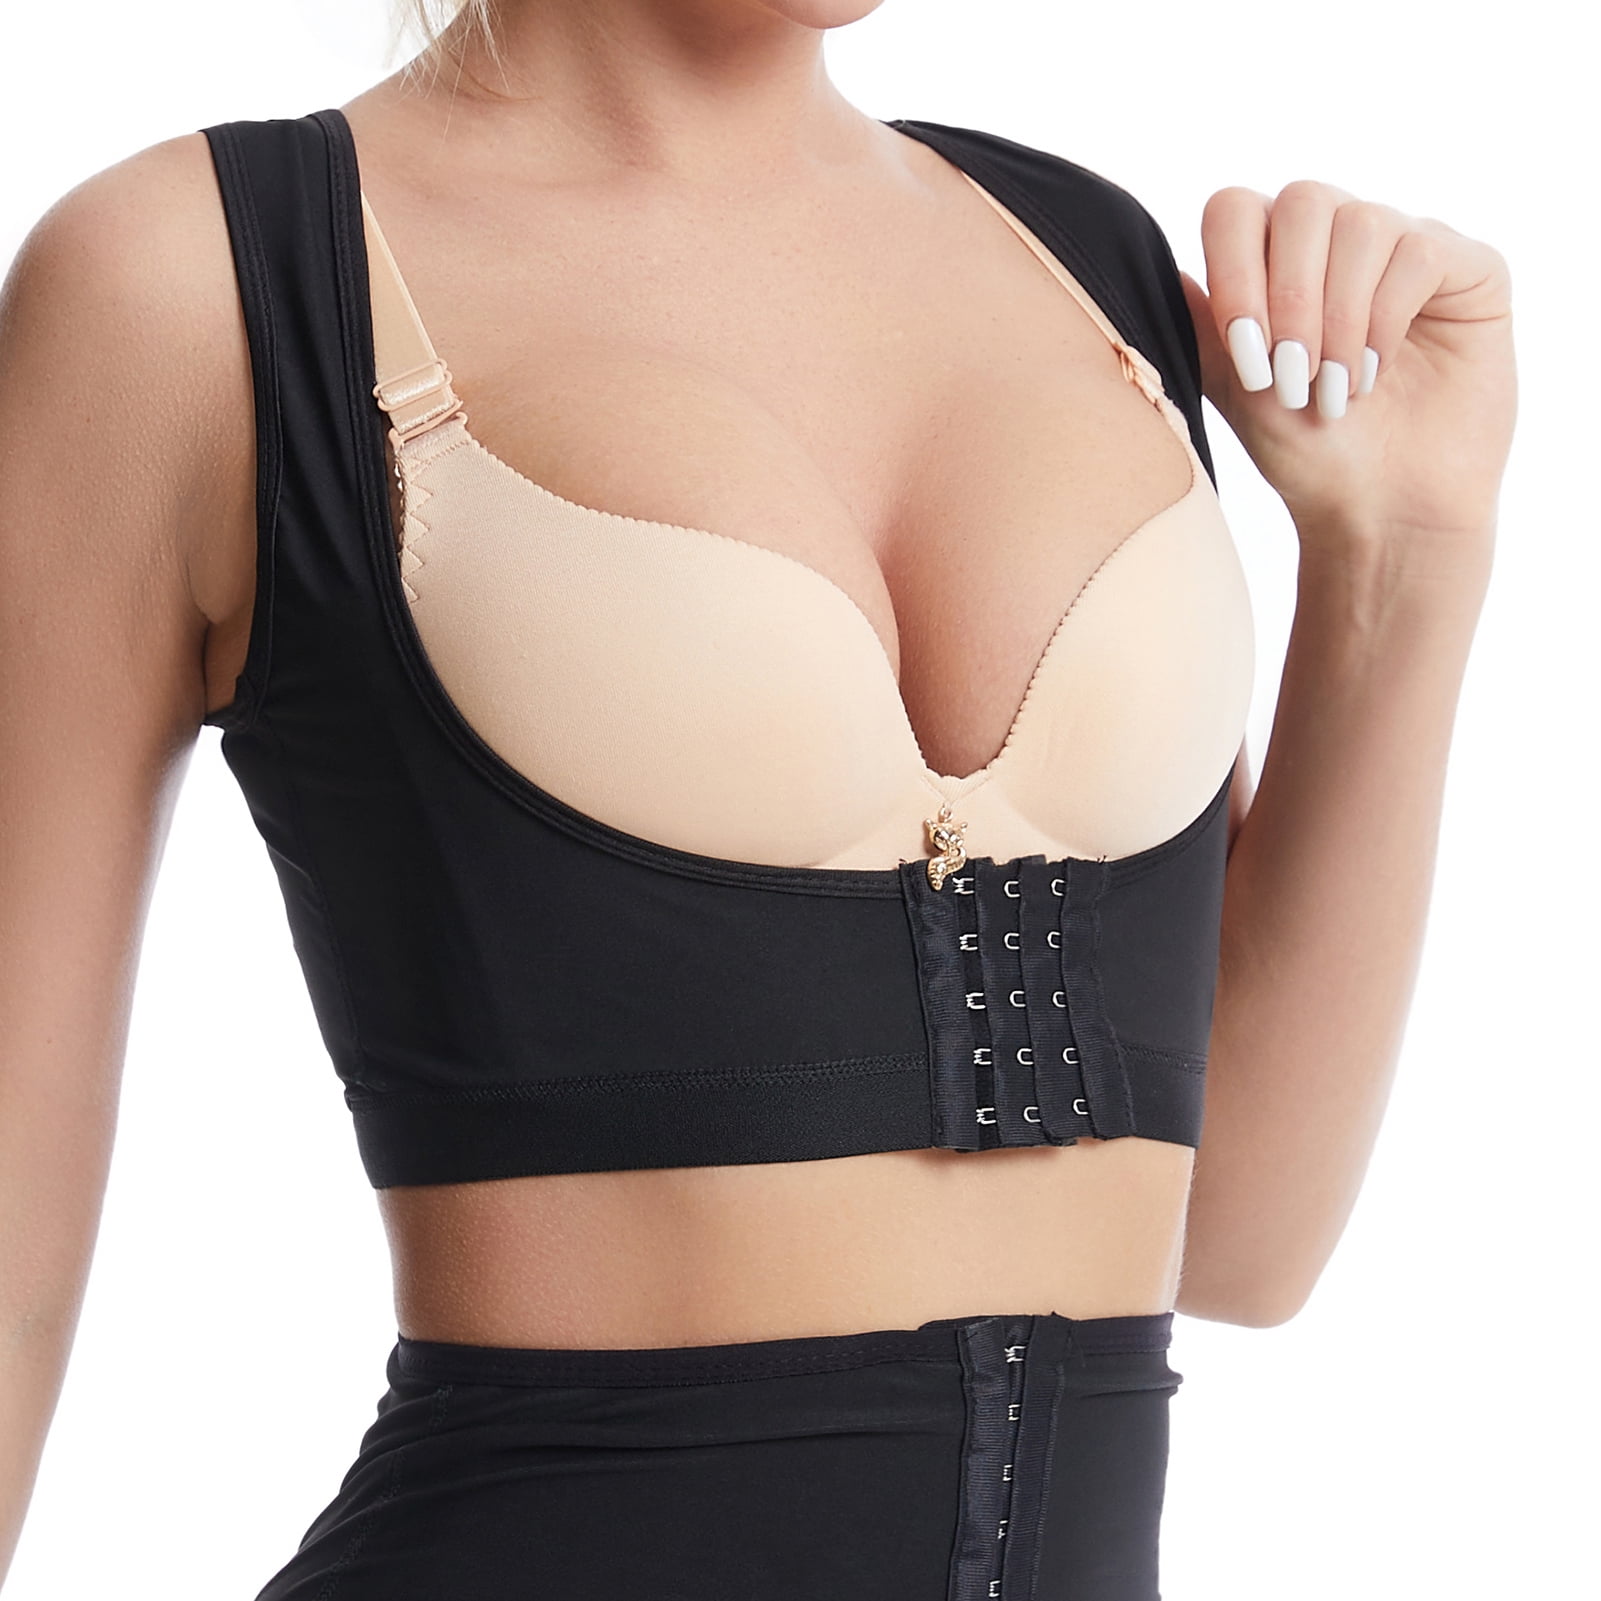 RAINED-Posture Corrector Shapewear for Women Back Support Brace Up Corset Back Humpback with Adjustable Waist Straps 